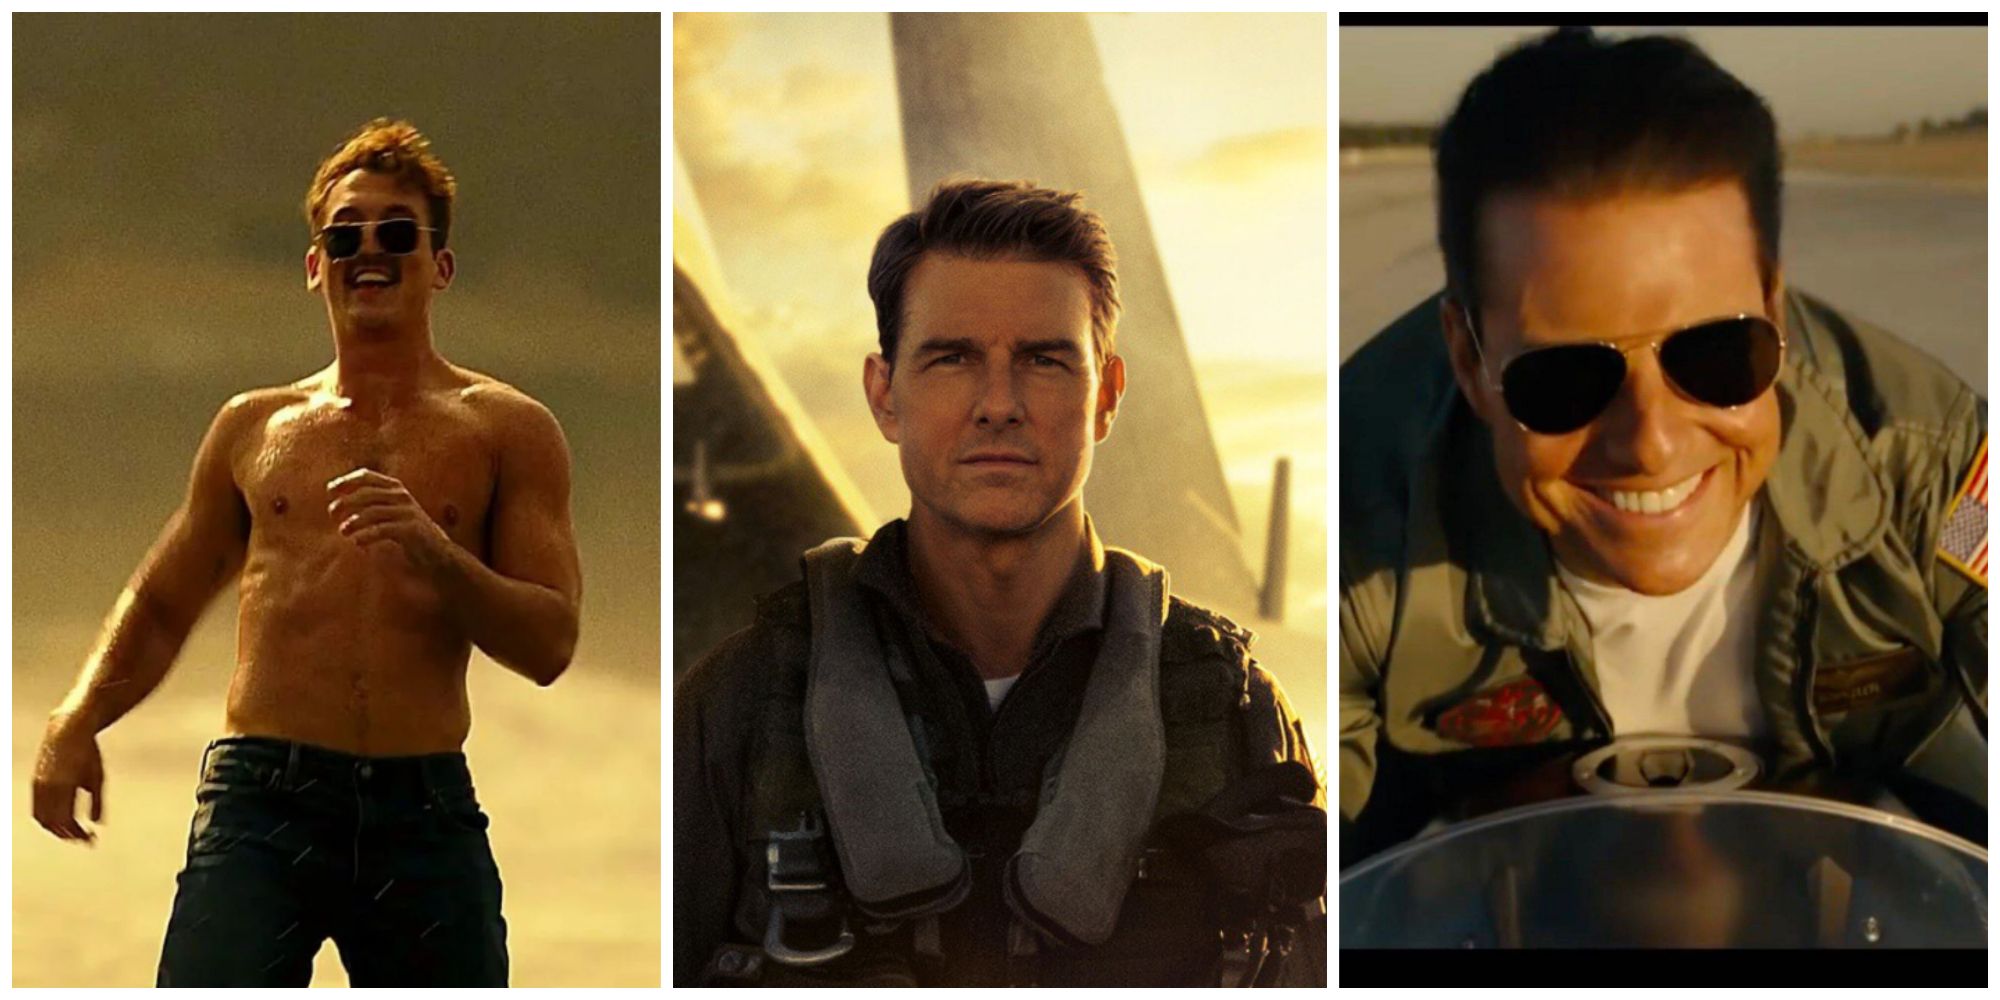 17 callbacks to 1986's 'Top Gun' to watch for in 'Maverick' - Los